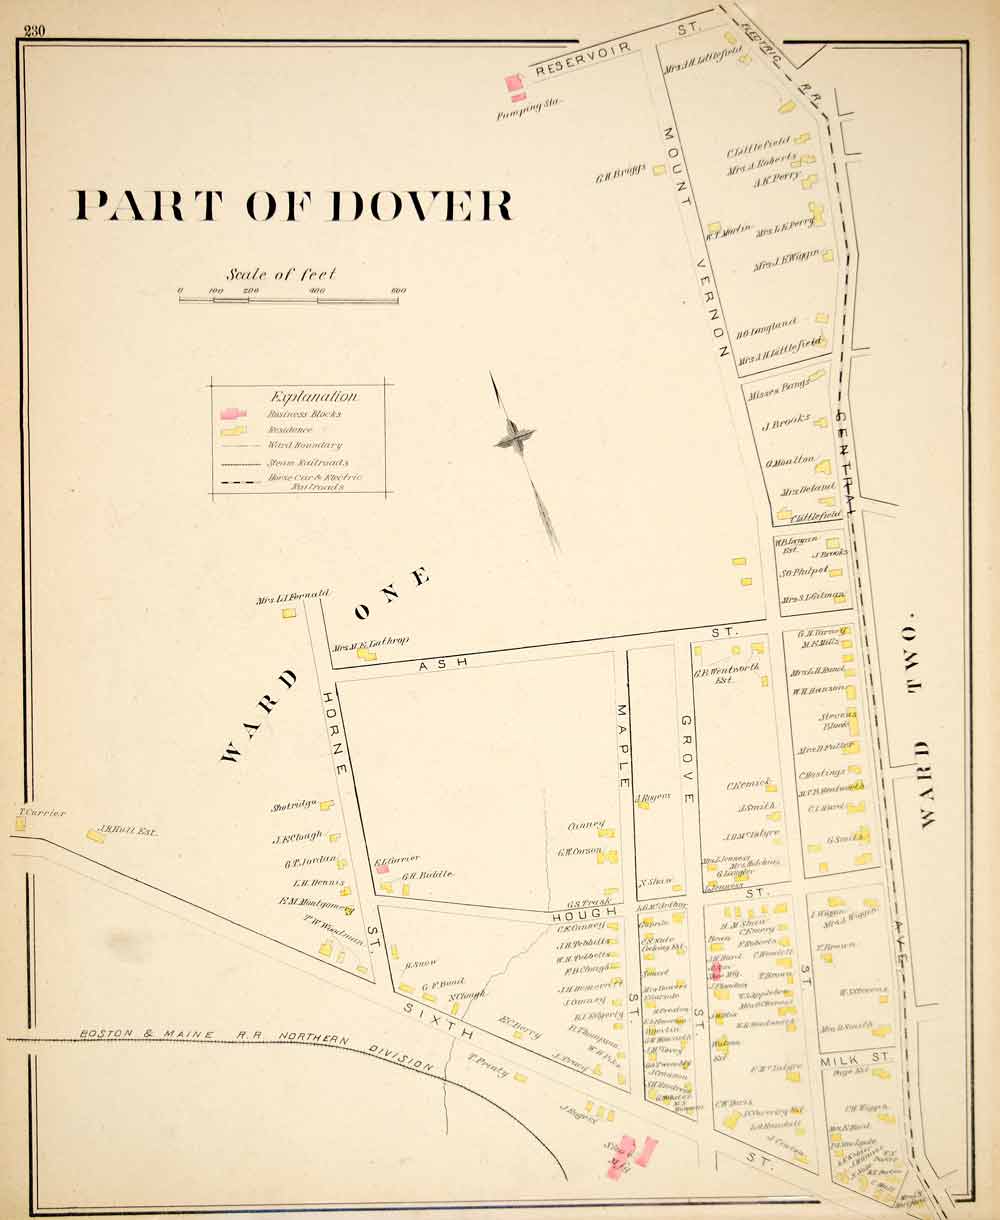 1892 Lithograph Map Dover City Ward 1 2 Strafford County New Hampshire NH YNHA2